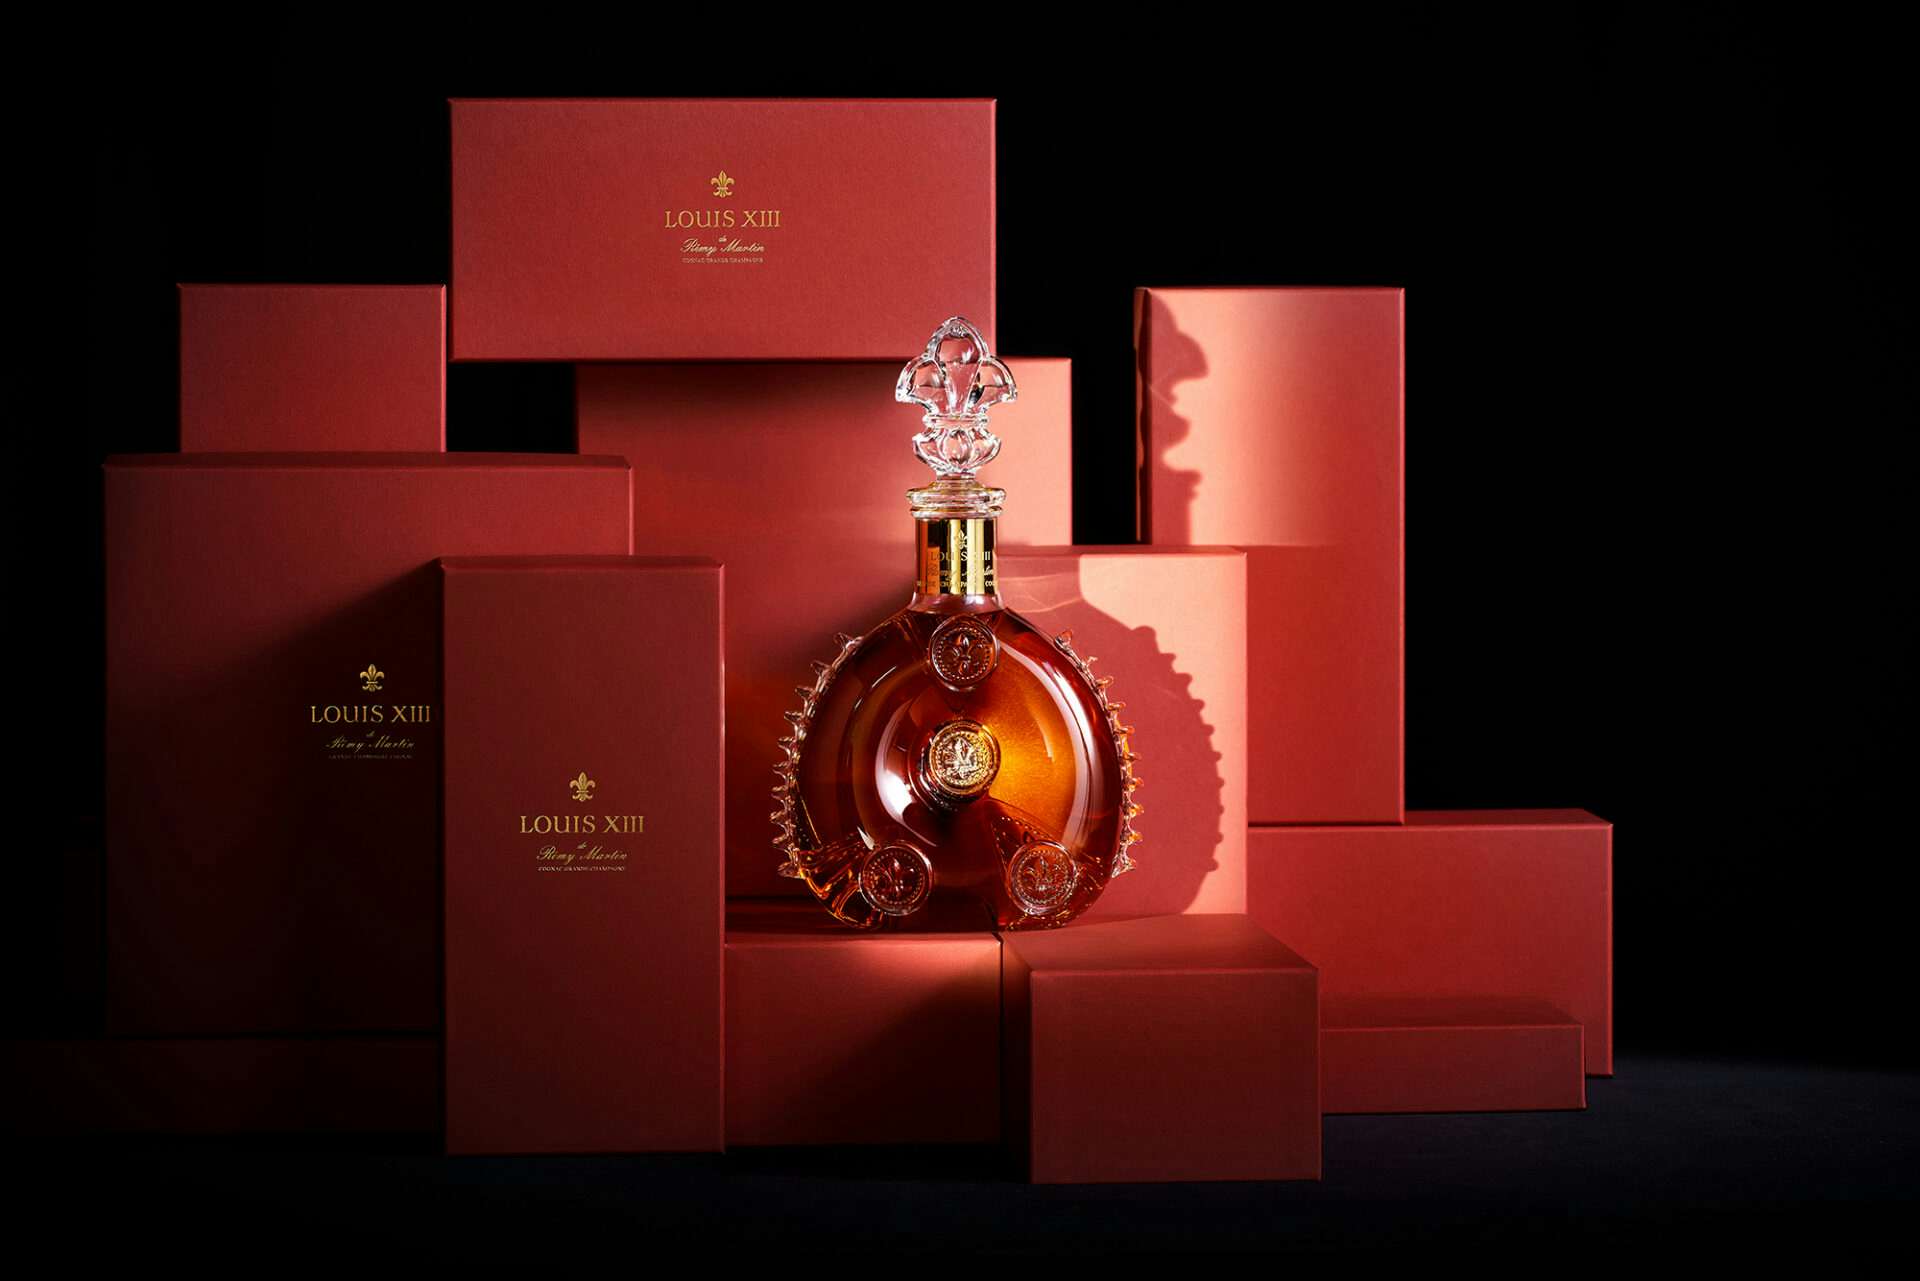 Introduction to the Remy Martin Louis XIII cognac: Cellar visit